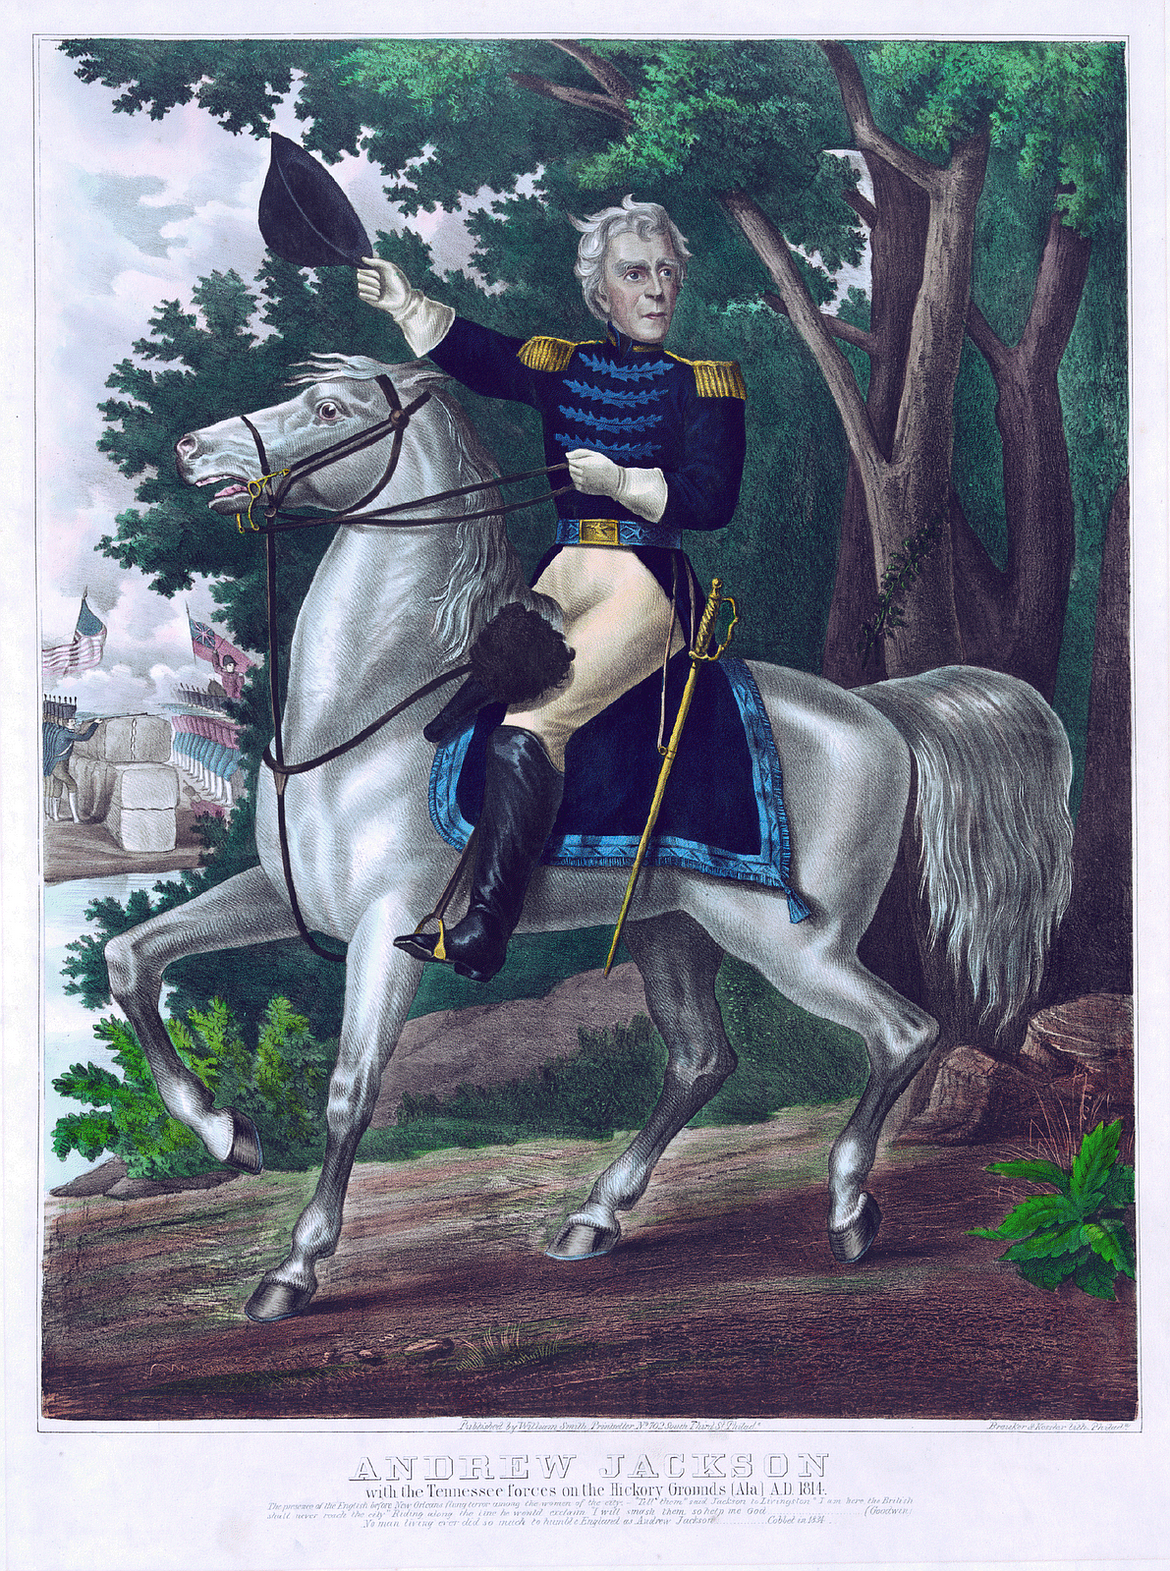 Andrew Jackson fought in 14 battles and wars, including the War of 1812 and the Indian Wars.